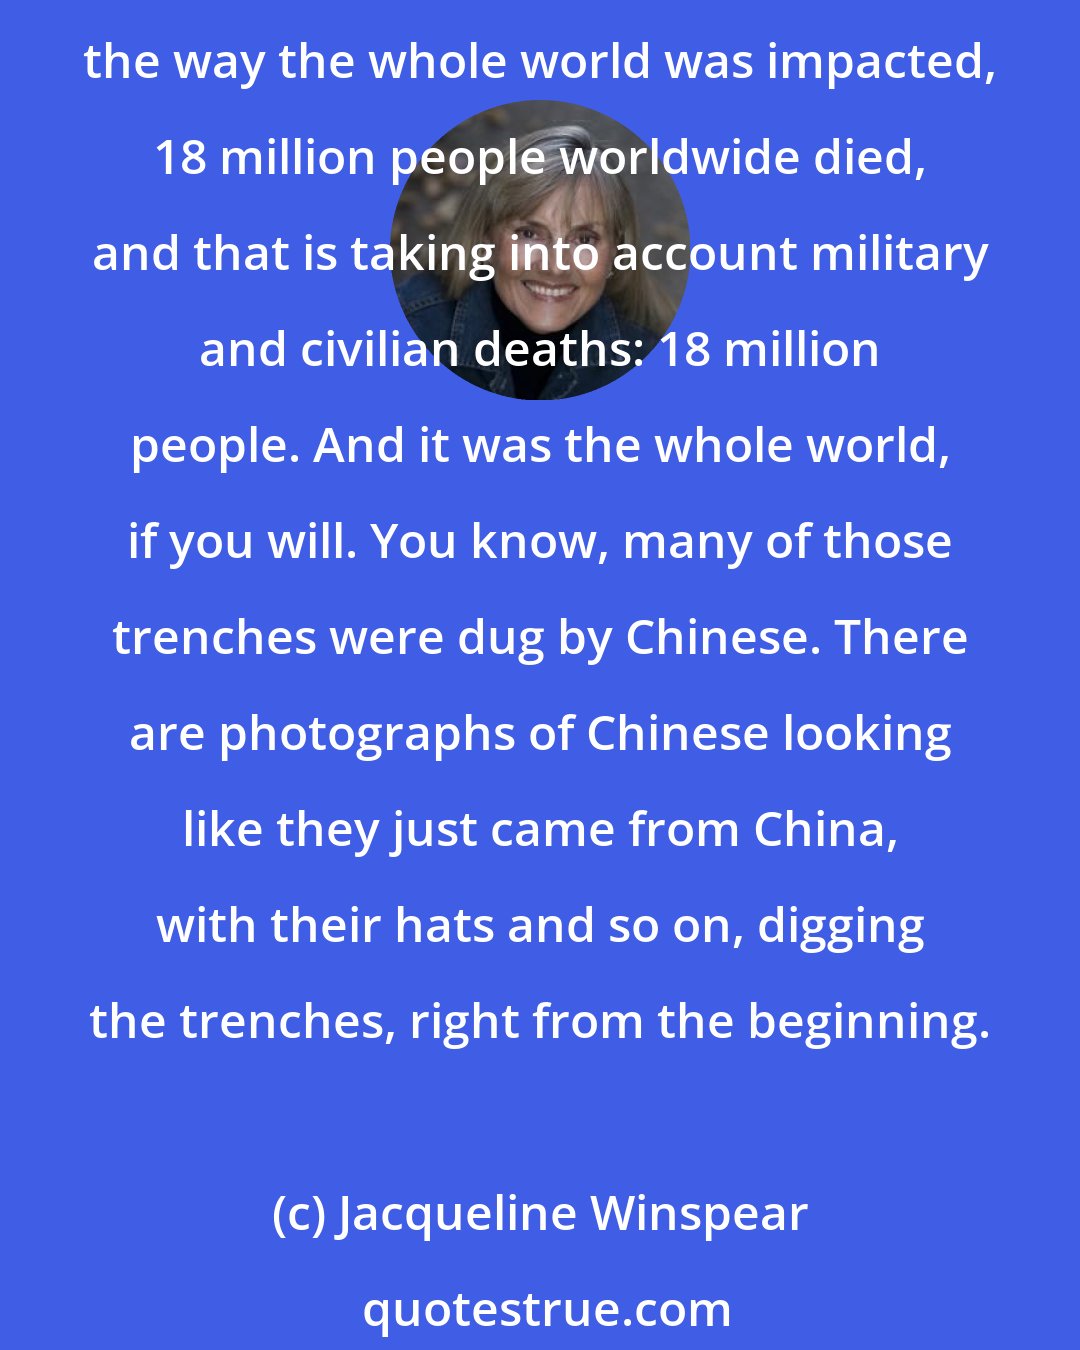 Jacqueline Winspear: As Churchill said about the Great War, and he said this in about 1924, that it was the first war in which man realized that he could obliterate himself completely. If you consider the way the whole world was impacted, 18 million people worldwide died, and that is taking into account military and civilian deaths: 18 million people. And it was the whole world, if you will. You know, many of those trenches were dug by Chinese. There are photographs of Chinese looking like they just came from China, with their hats and so on, digging the trenches, right from the beginning.